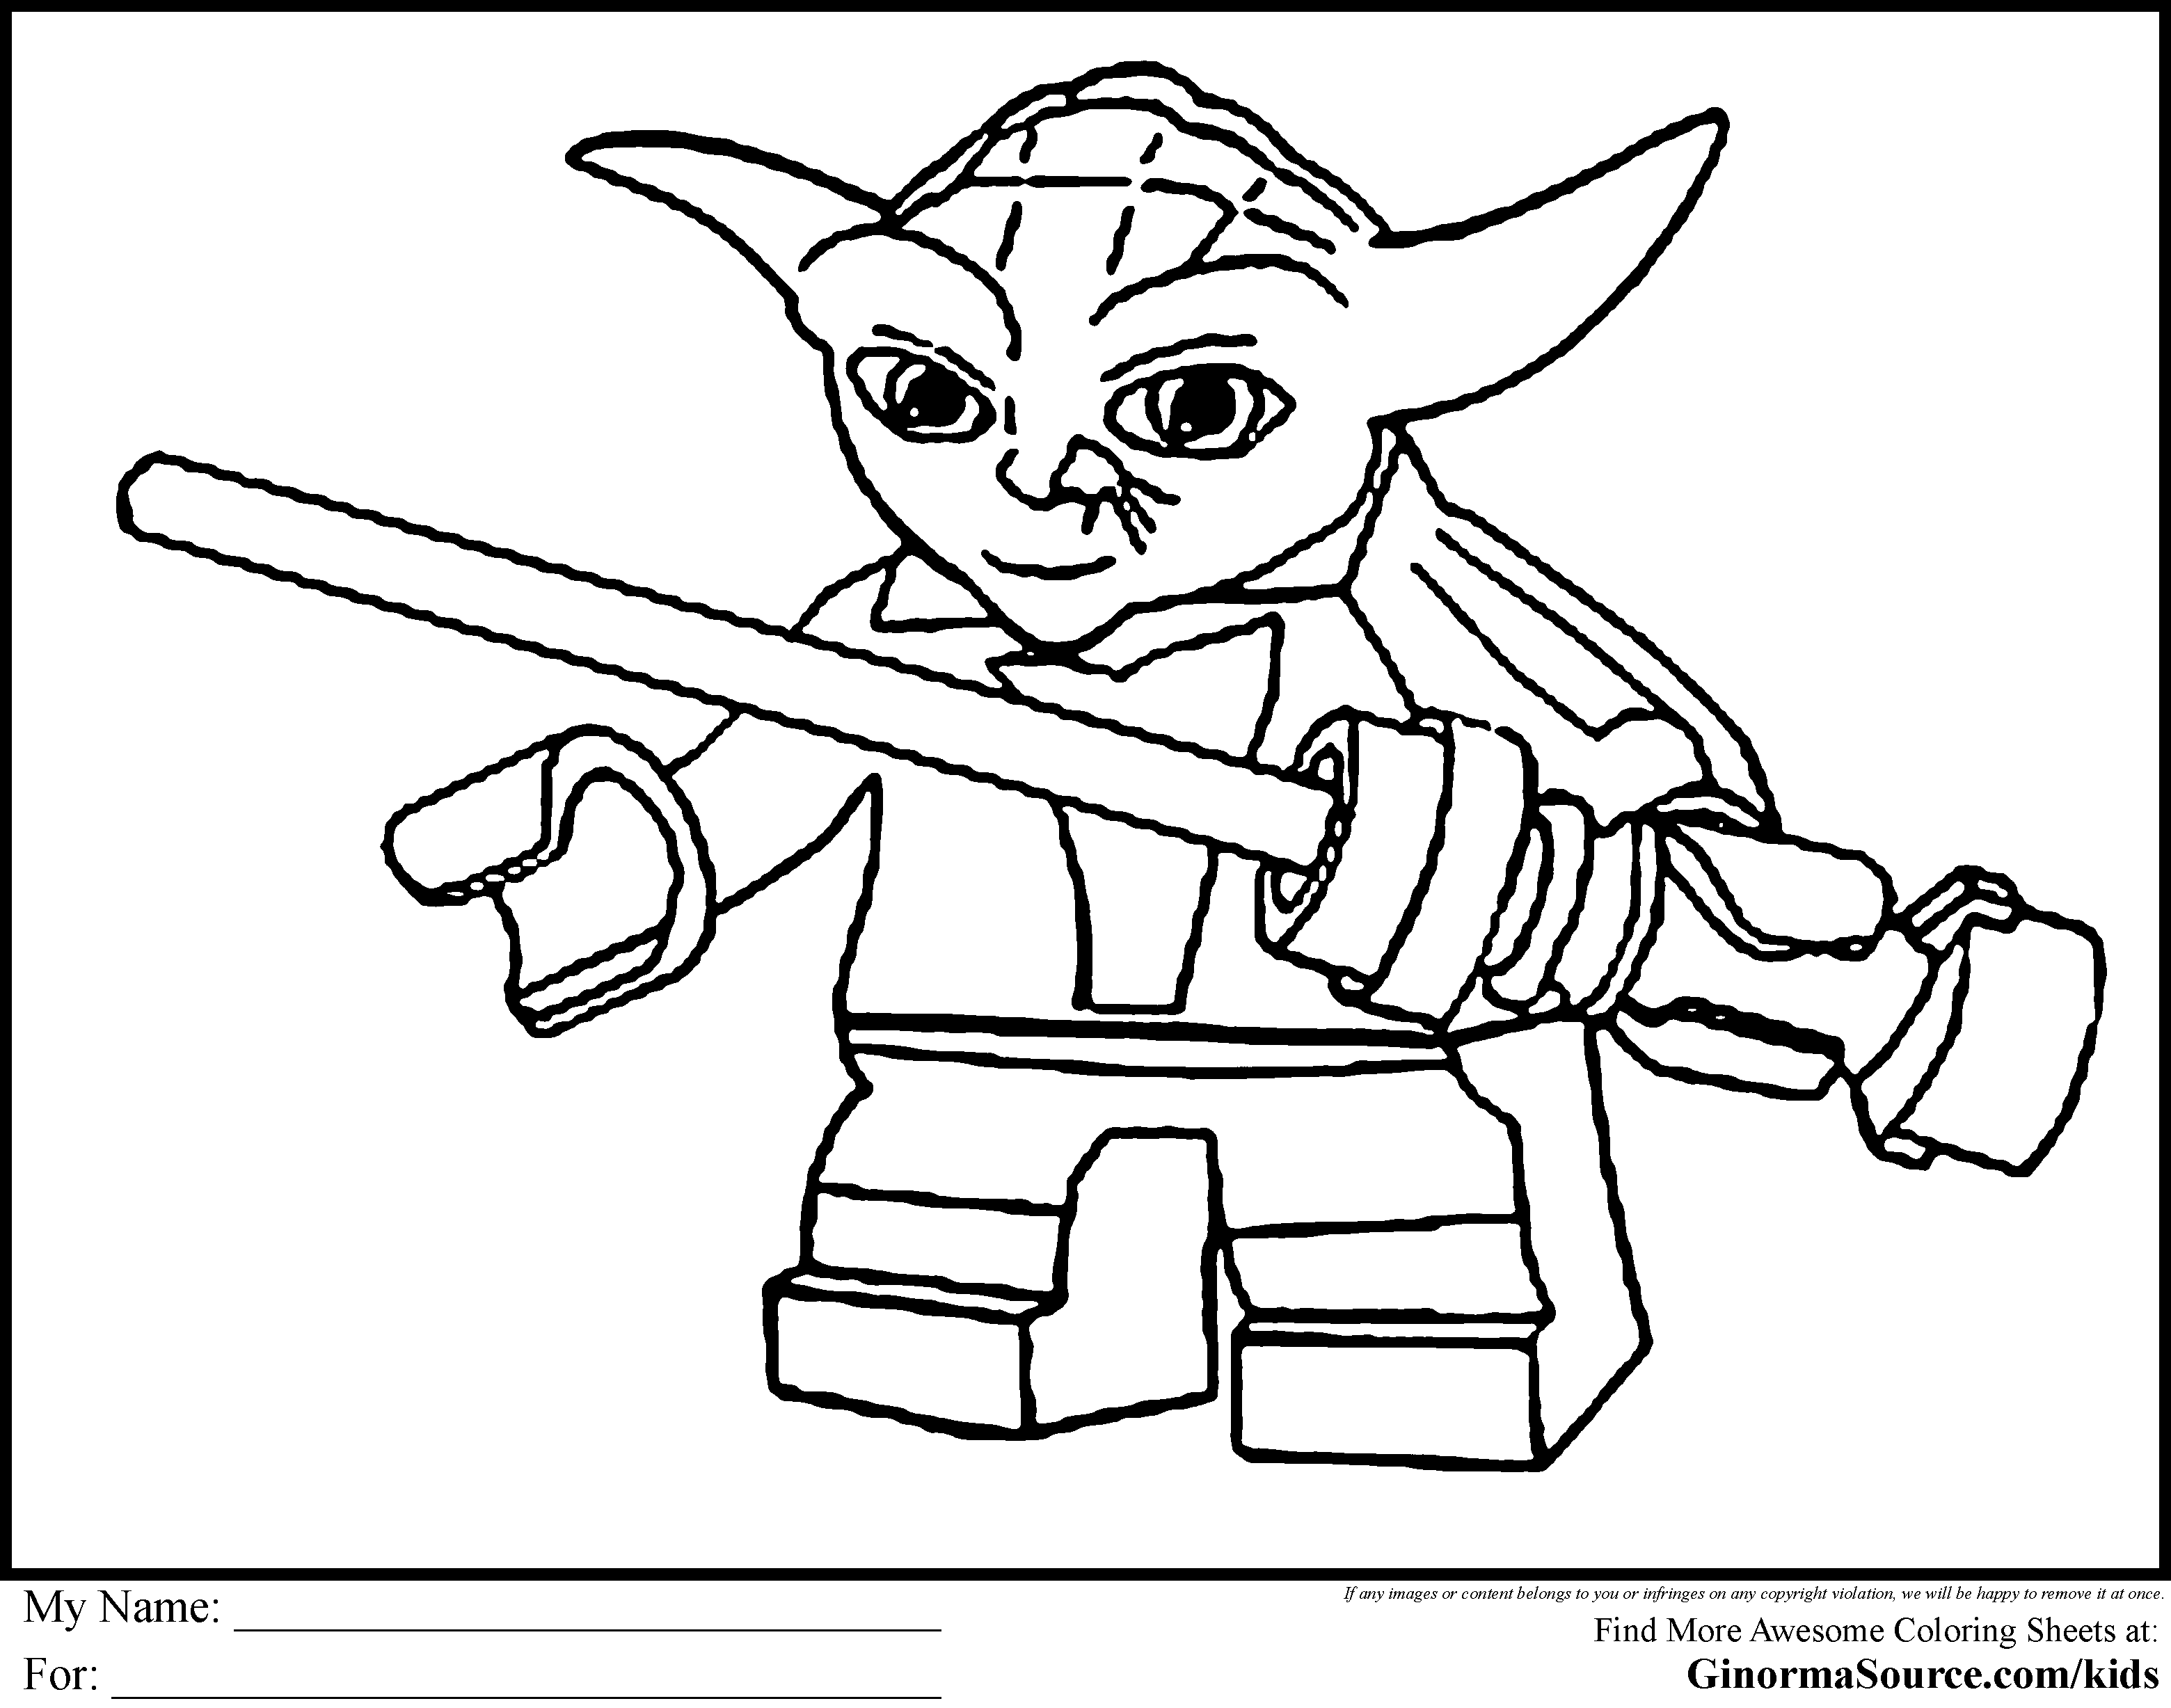 lego starwars coloring pages lego star wars coloring pages to download and print for free lego coloring pages starwars 